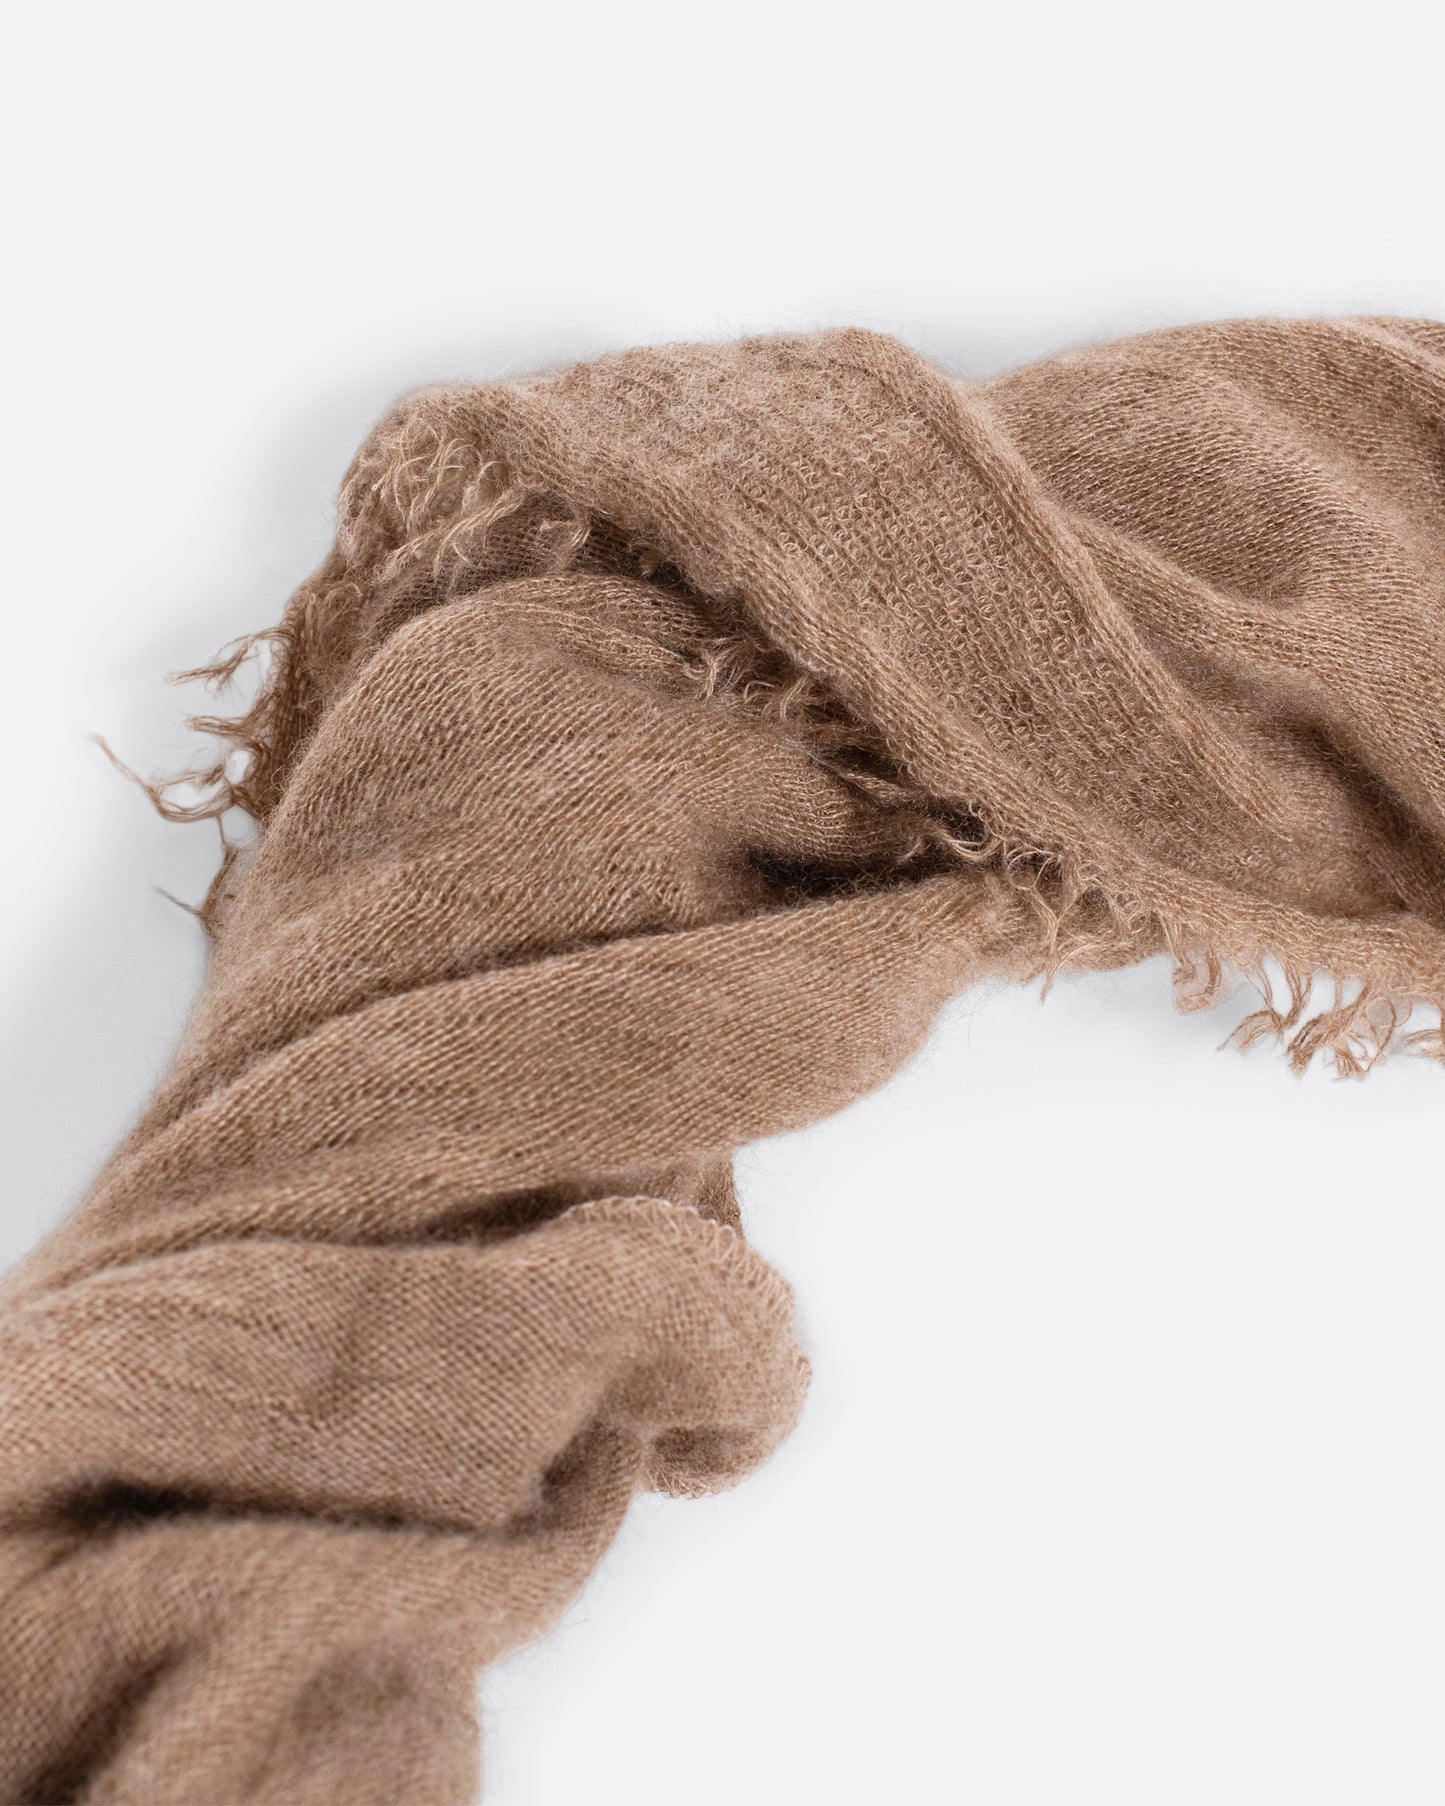 this is a rare cashmere piece you'll never take off. Style as a scarf, babushka, shawl, layer under chunky necklaces, or tie it on your bag. Available in warm beige, navy, black, and charcoal milk.